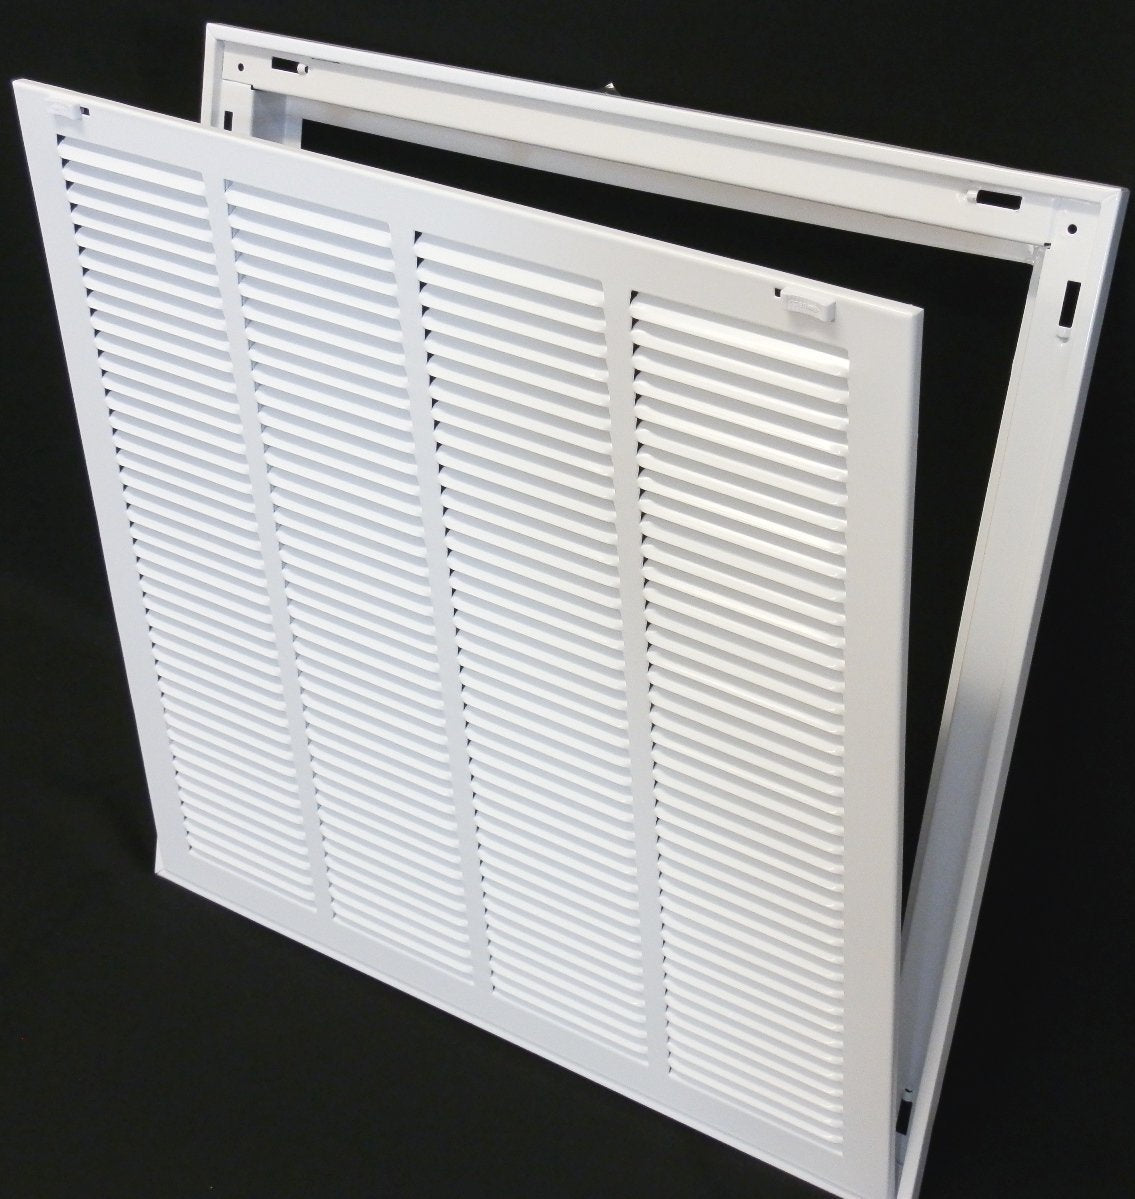 12&quot; X 22&quot; Steel Return Air Filter Grille for 1&quot; Filter - Removable Frame - [Outer Dimensions: 14 5/8&quot; X 24 5/8&quot;]